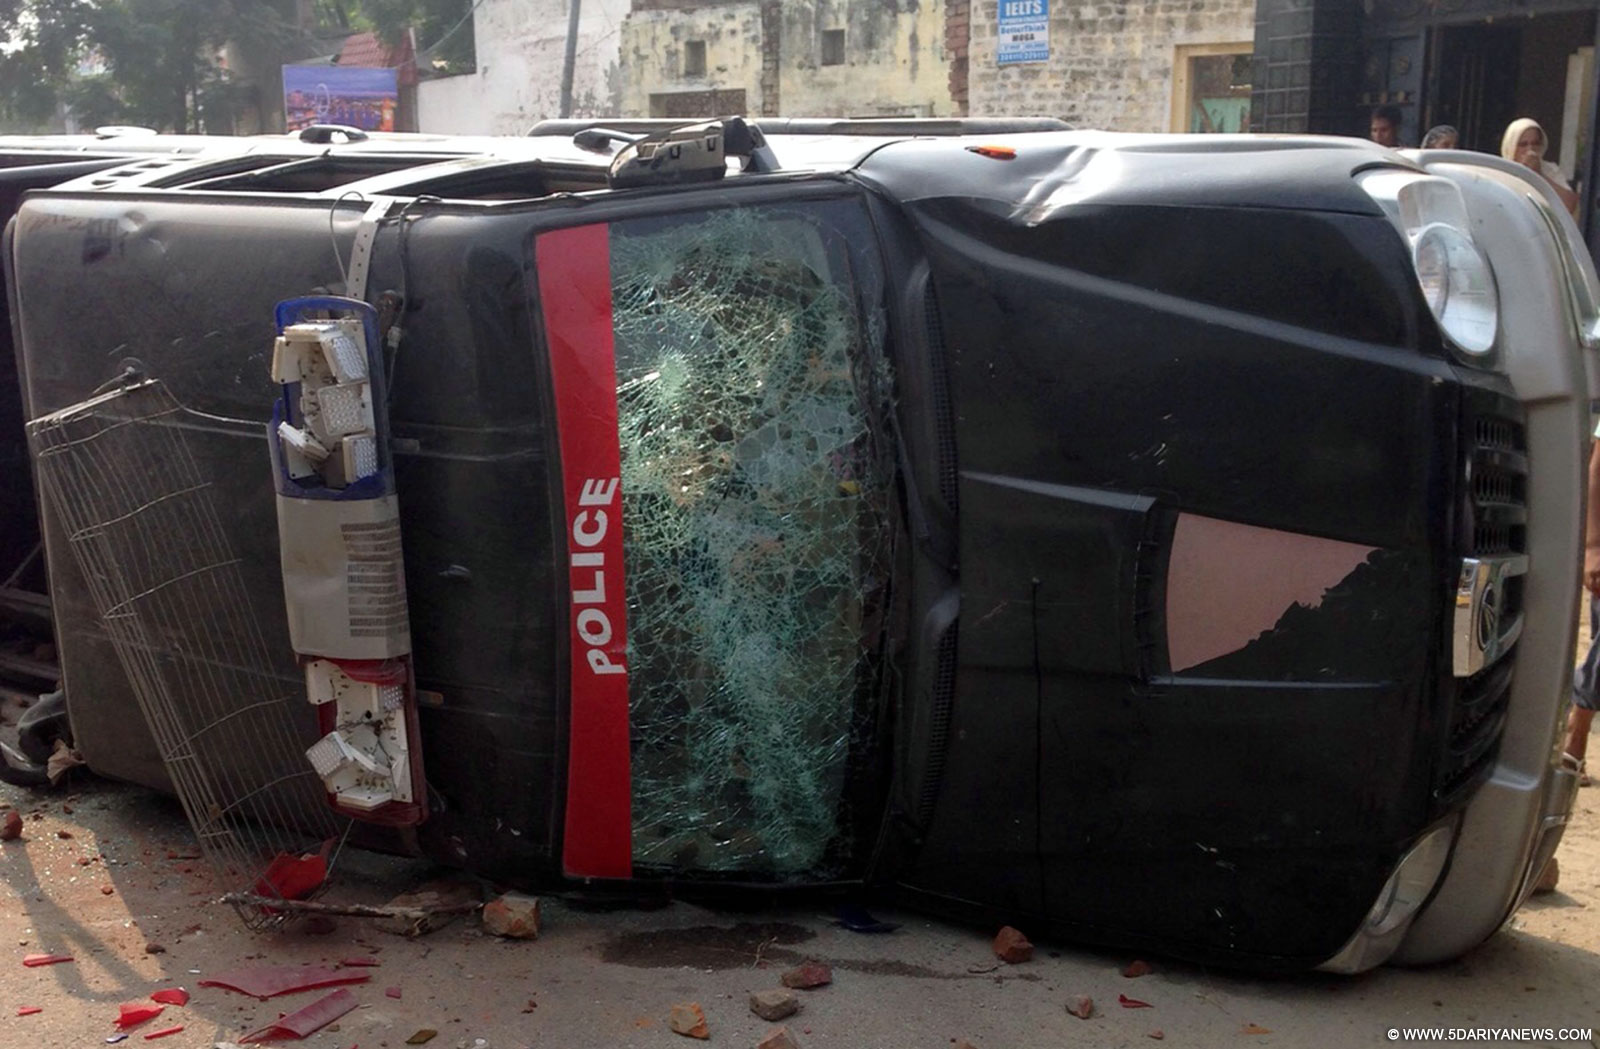 A police vehicle damaged after Sikhs protesting against desecration of their holy book clashed with police in Faridkot of Punjab on Oct 14, 2015.